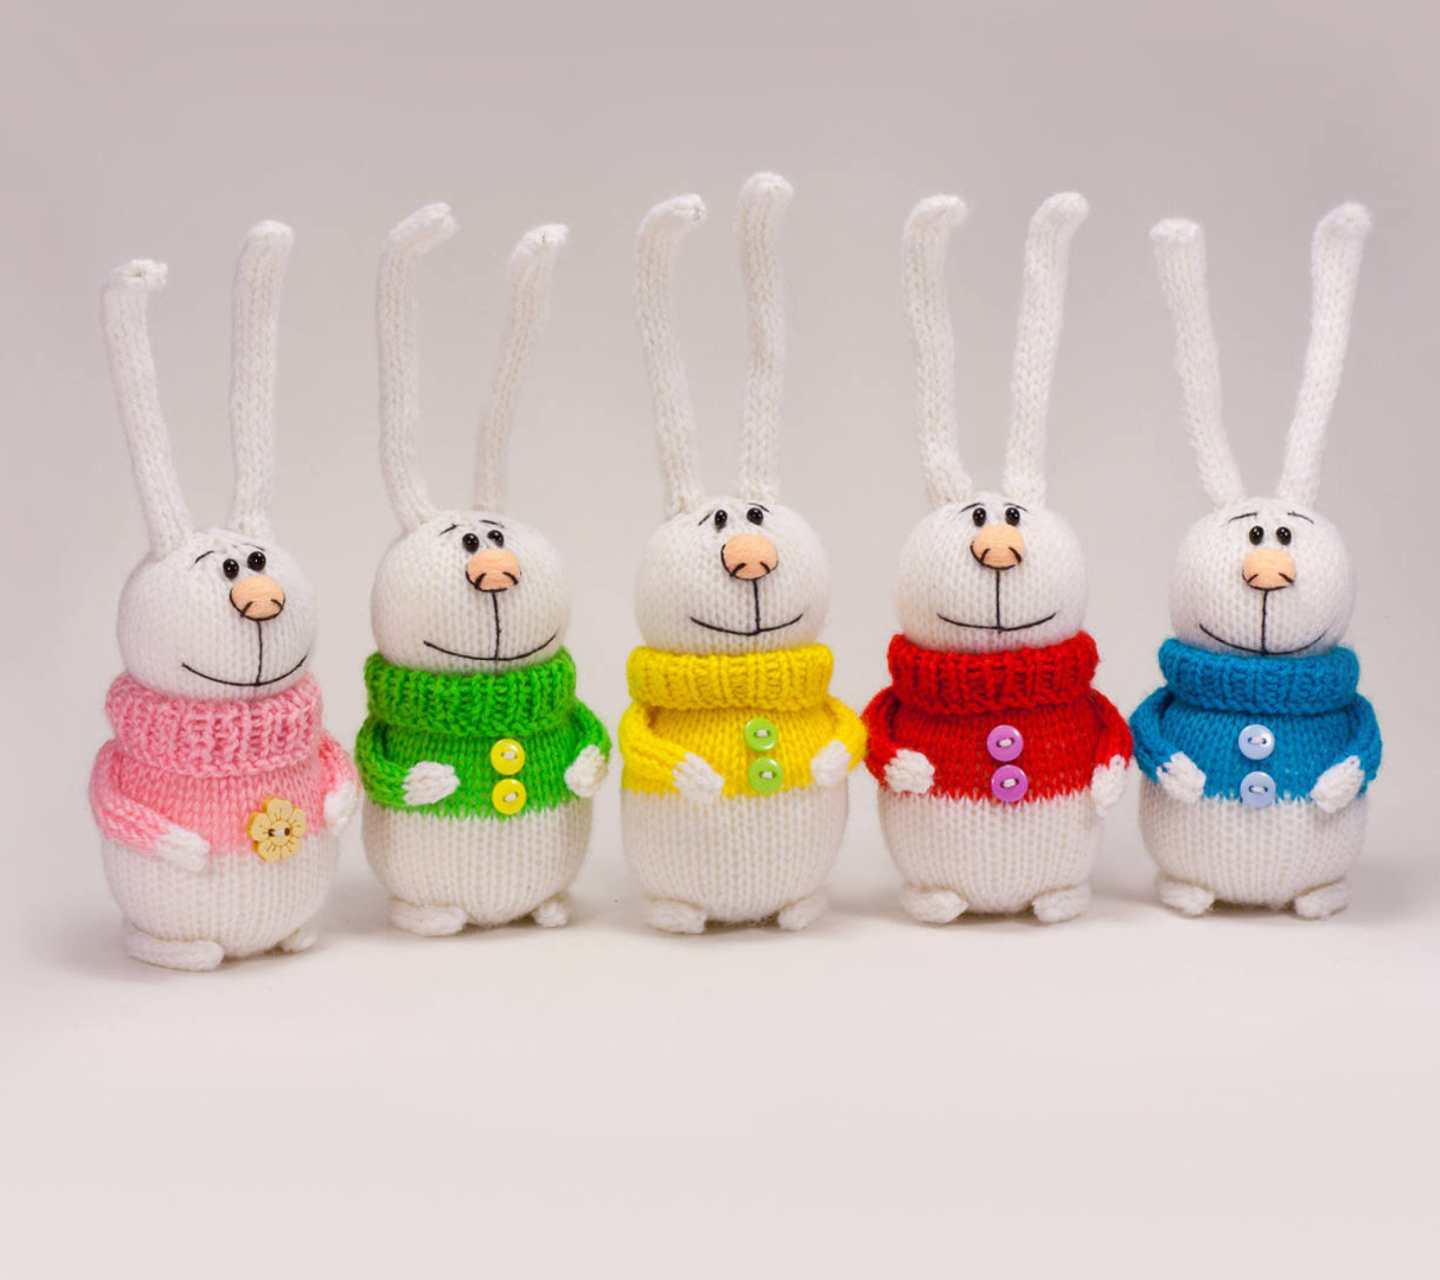 Knitted Bunnies In Colorful Sweaters screenshot #1 1440x1280